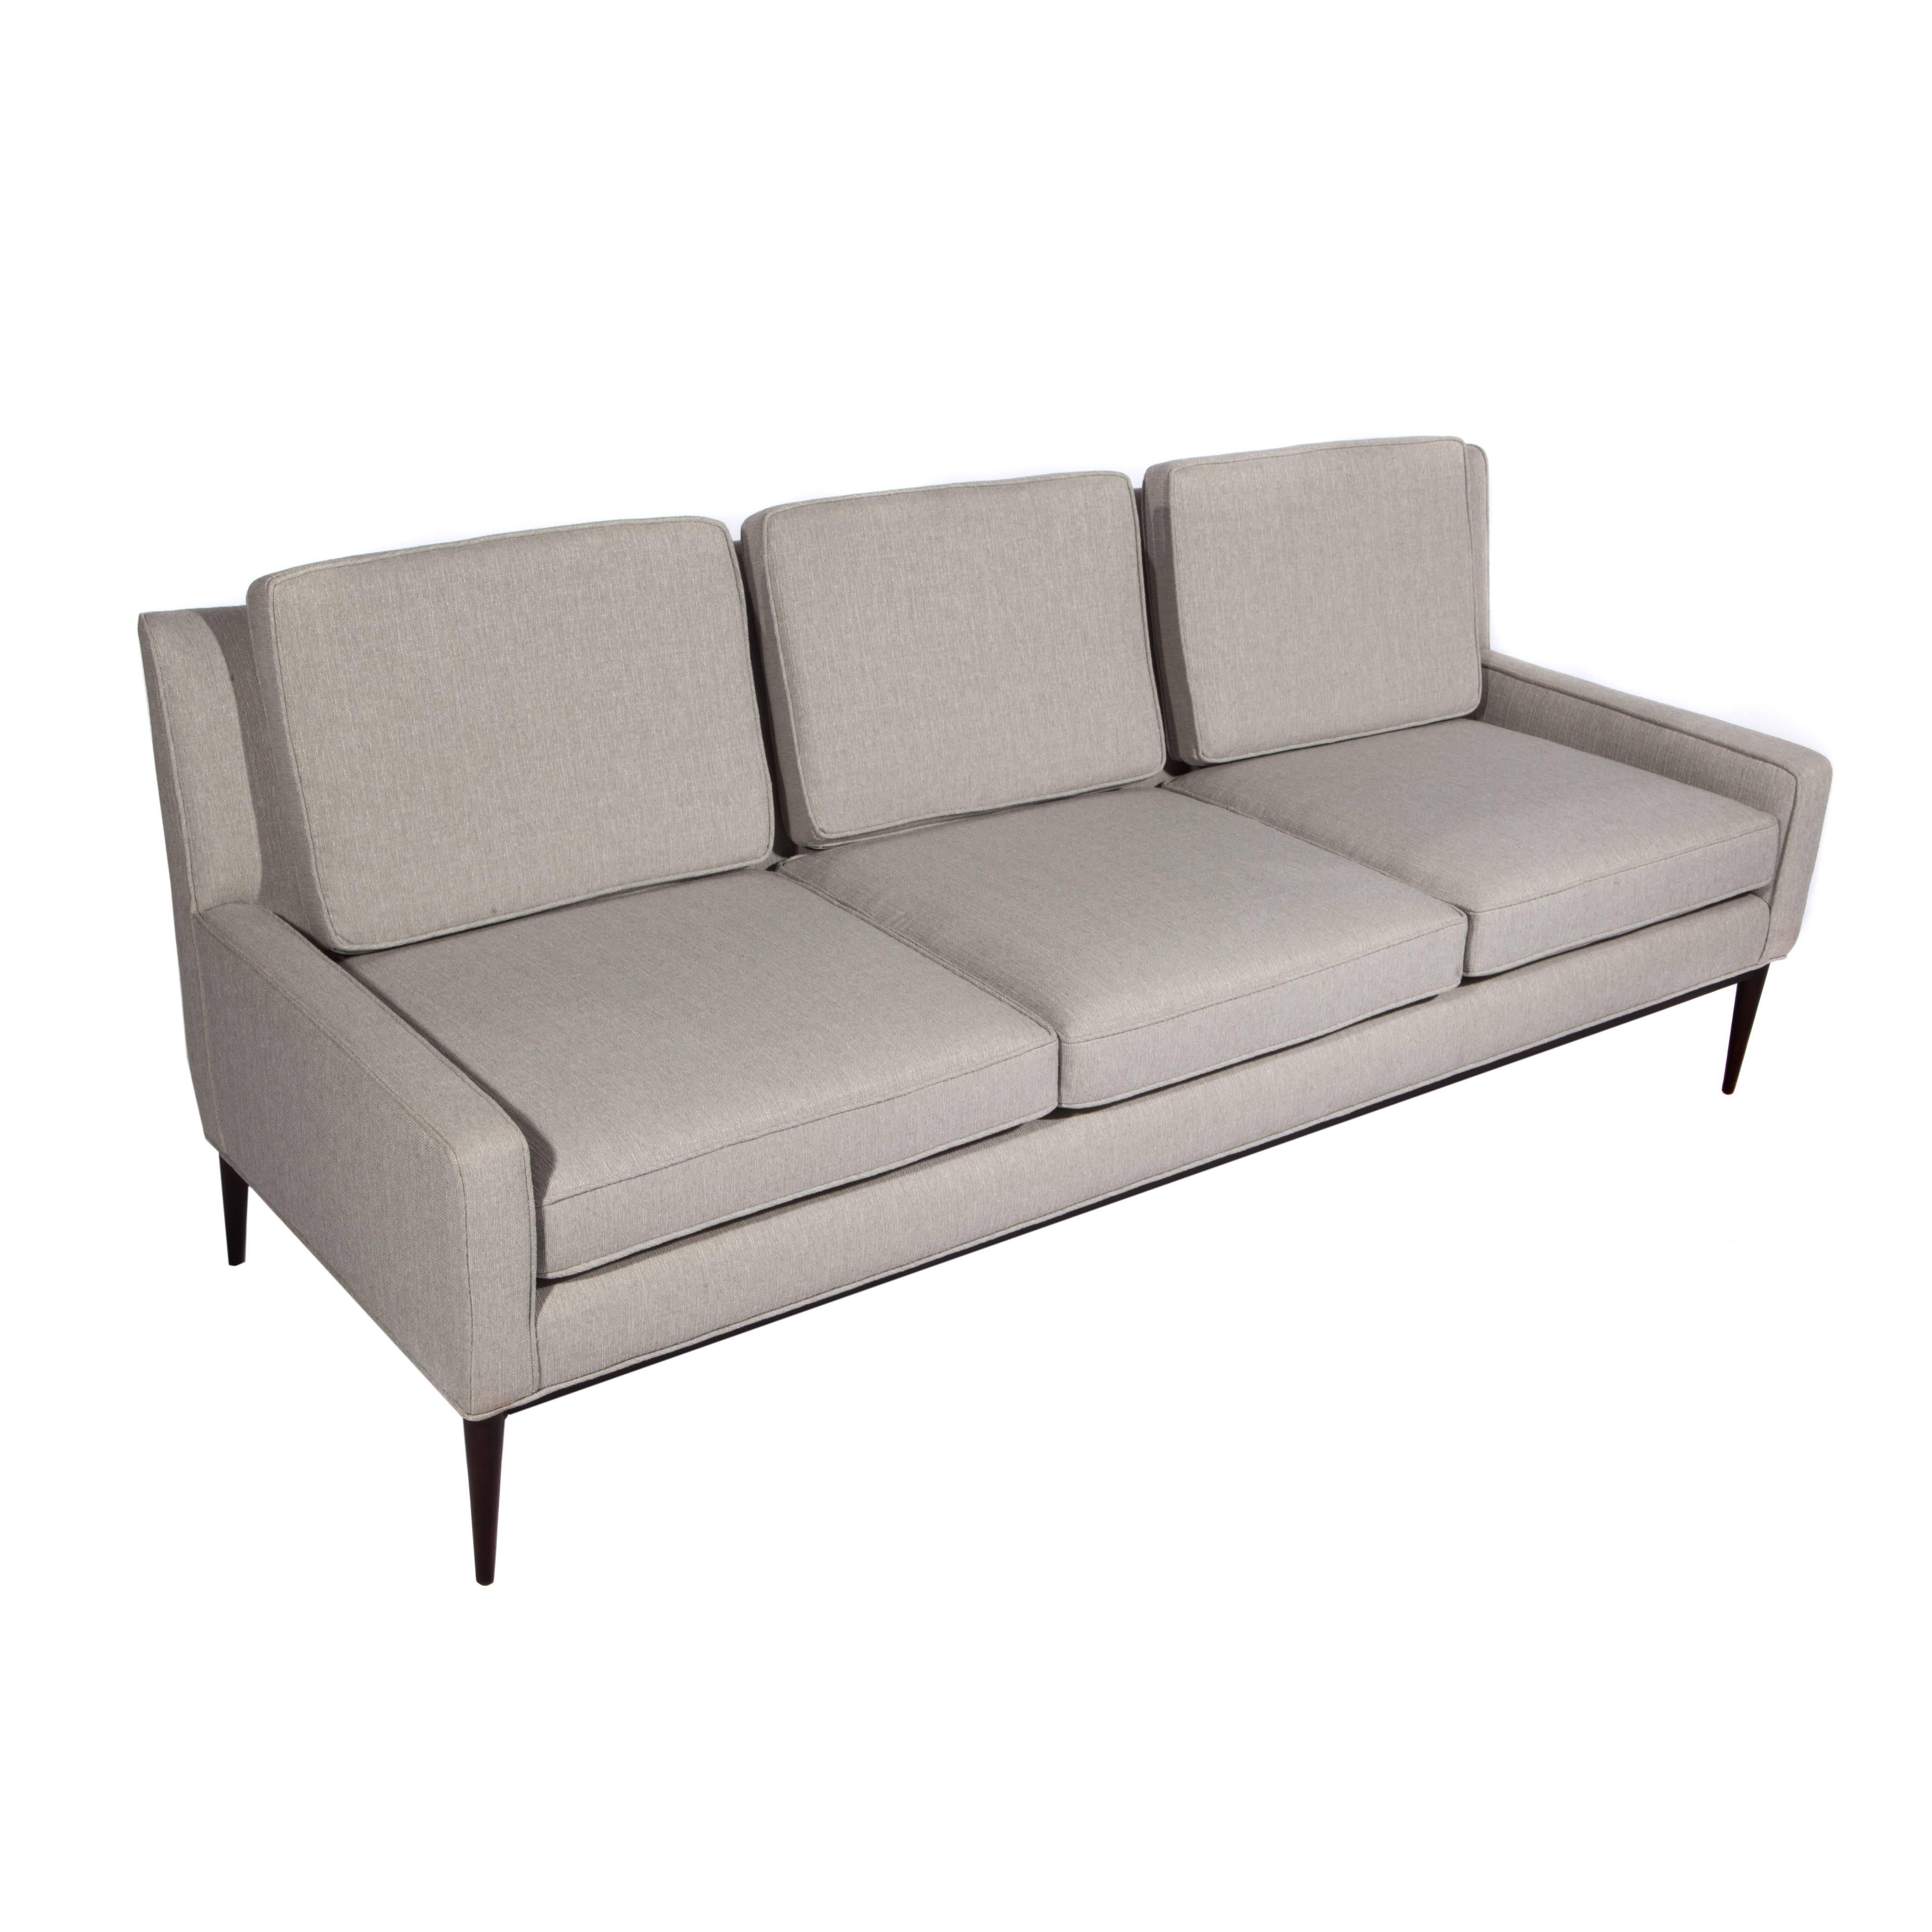 Chic, curved-back, three-seat 1950s Paul McCobb sofa floating on tapered and angled walnut legs. Newly restored and reupholstered in a light silver-gray woven fabric. Fabric swatch available. 

